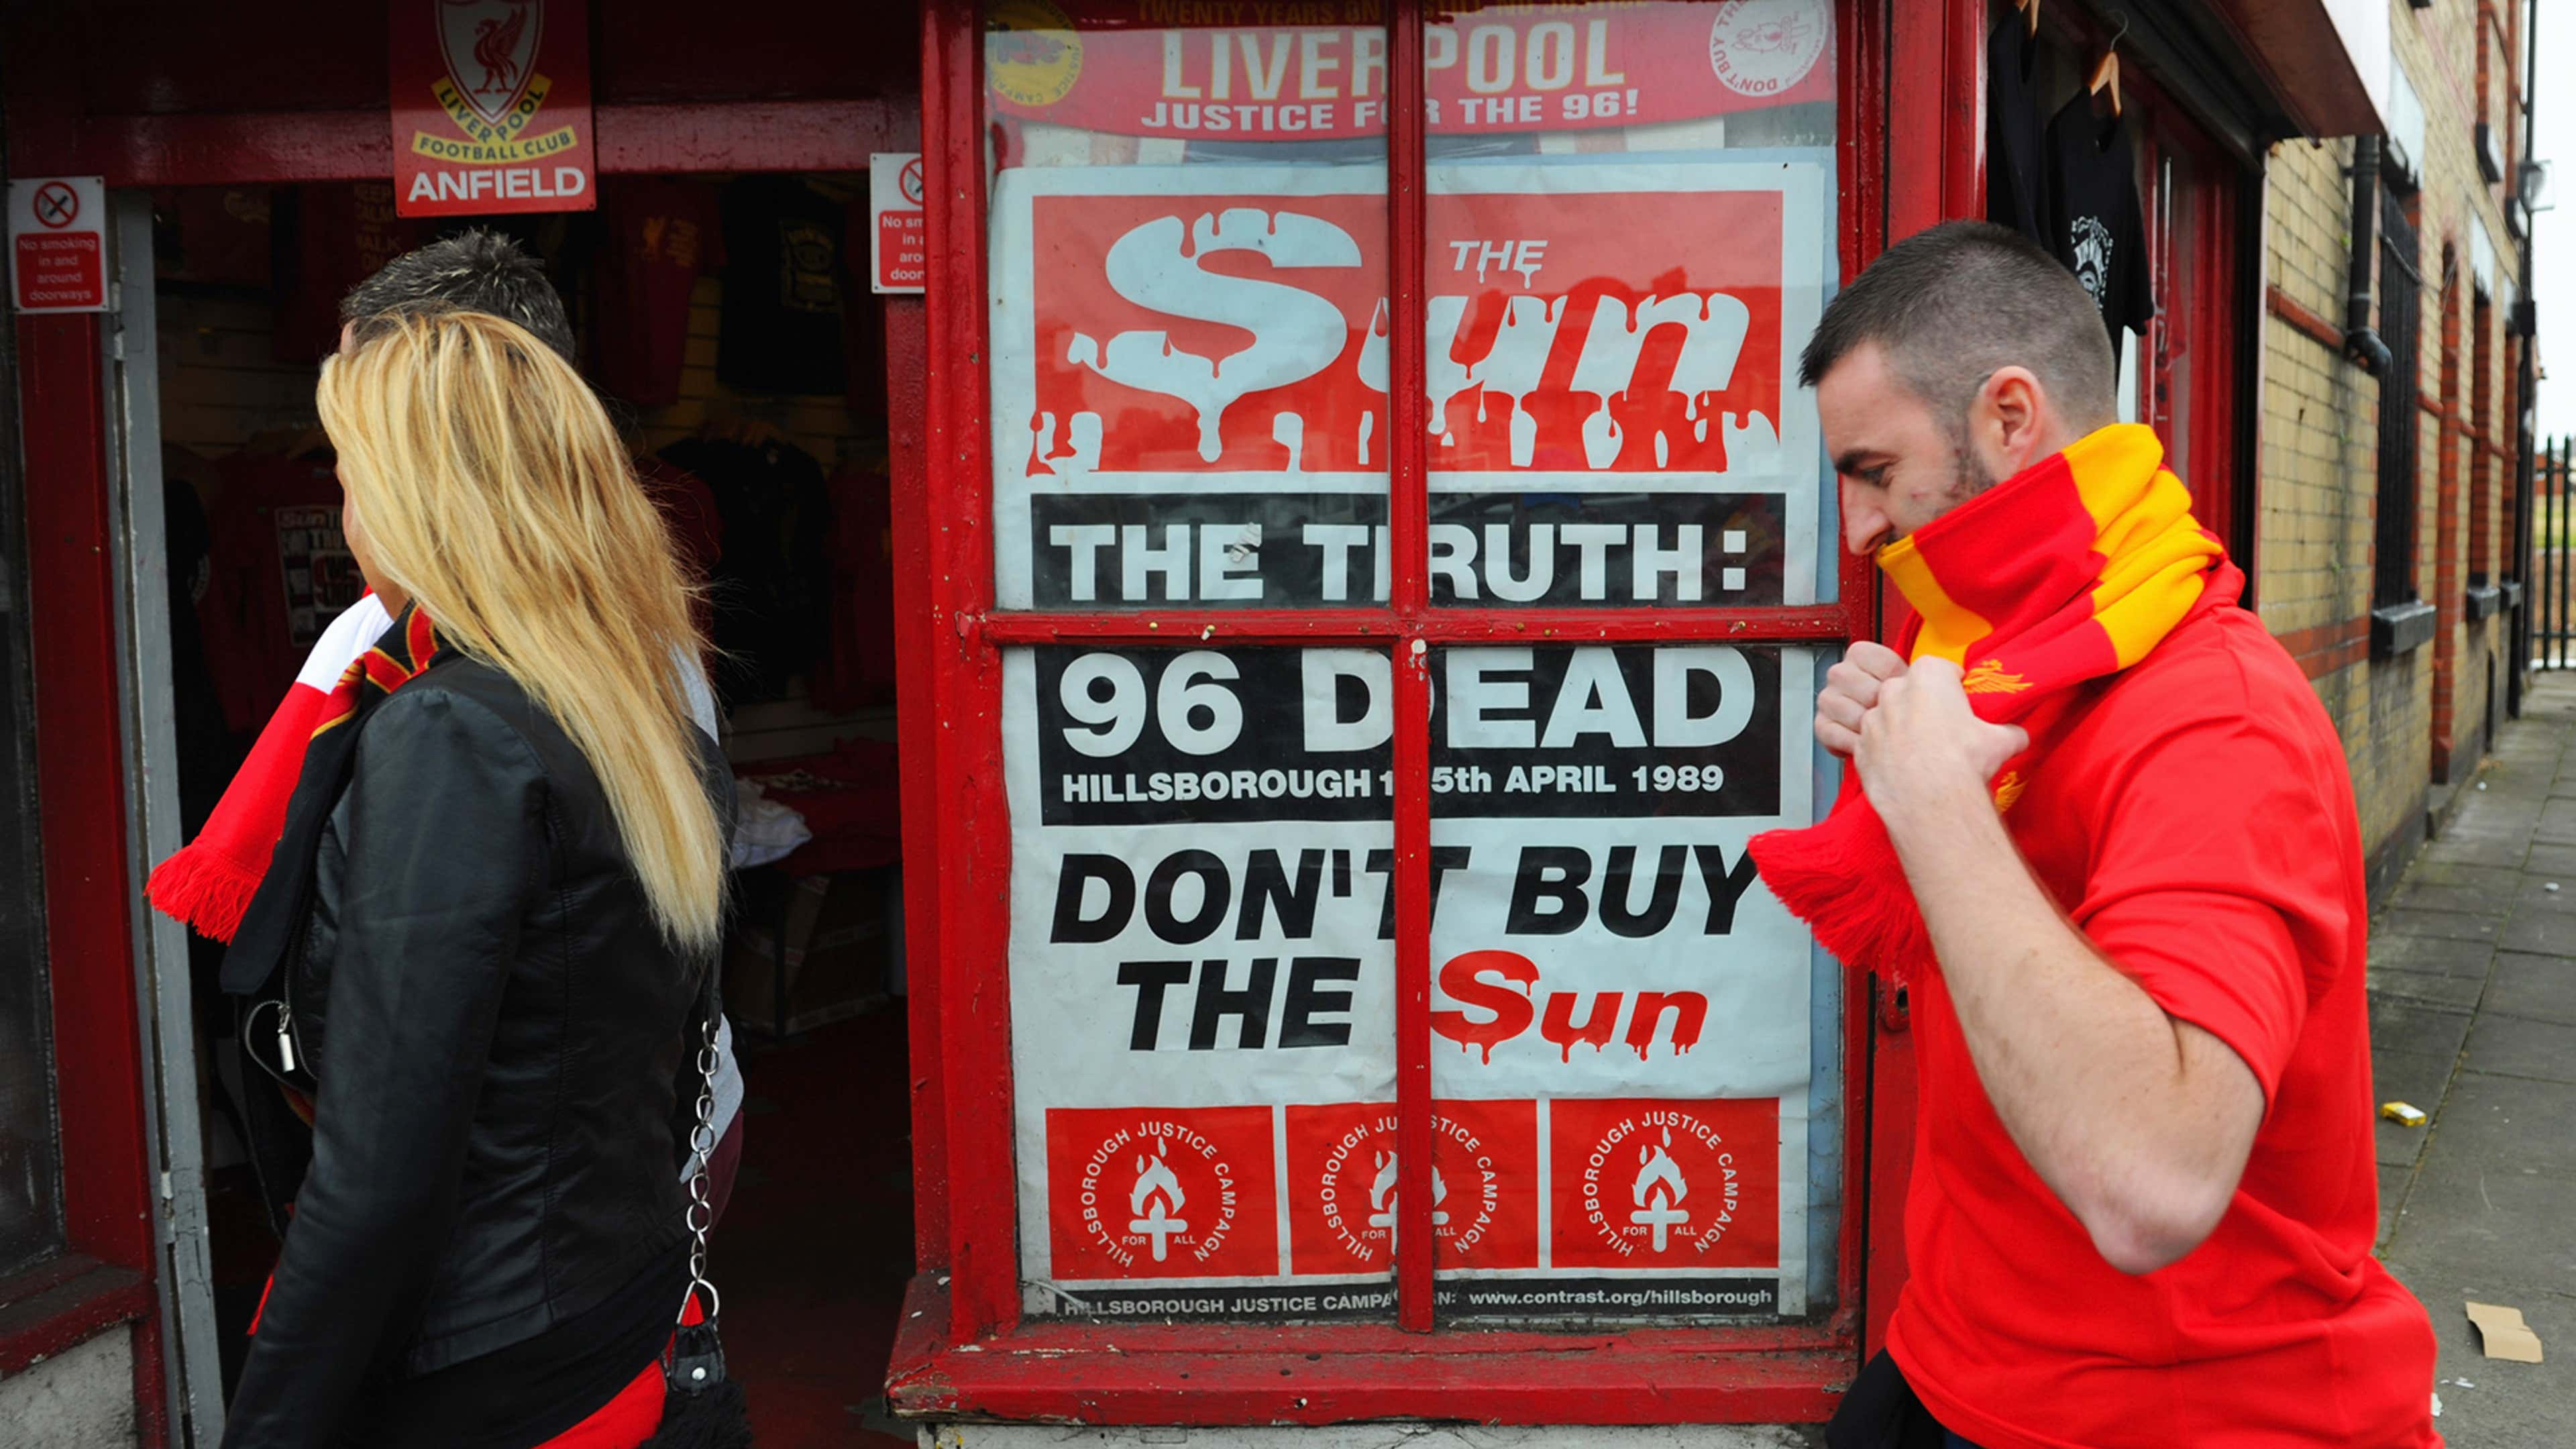 Why do people not buy The Sun in Liverpool